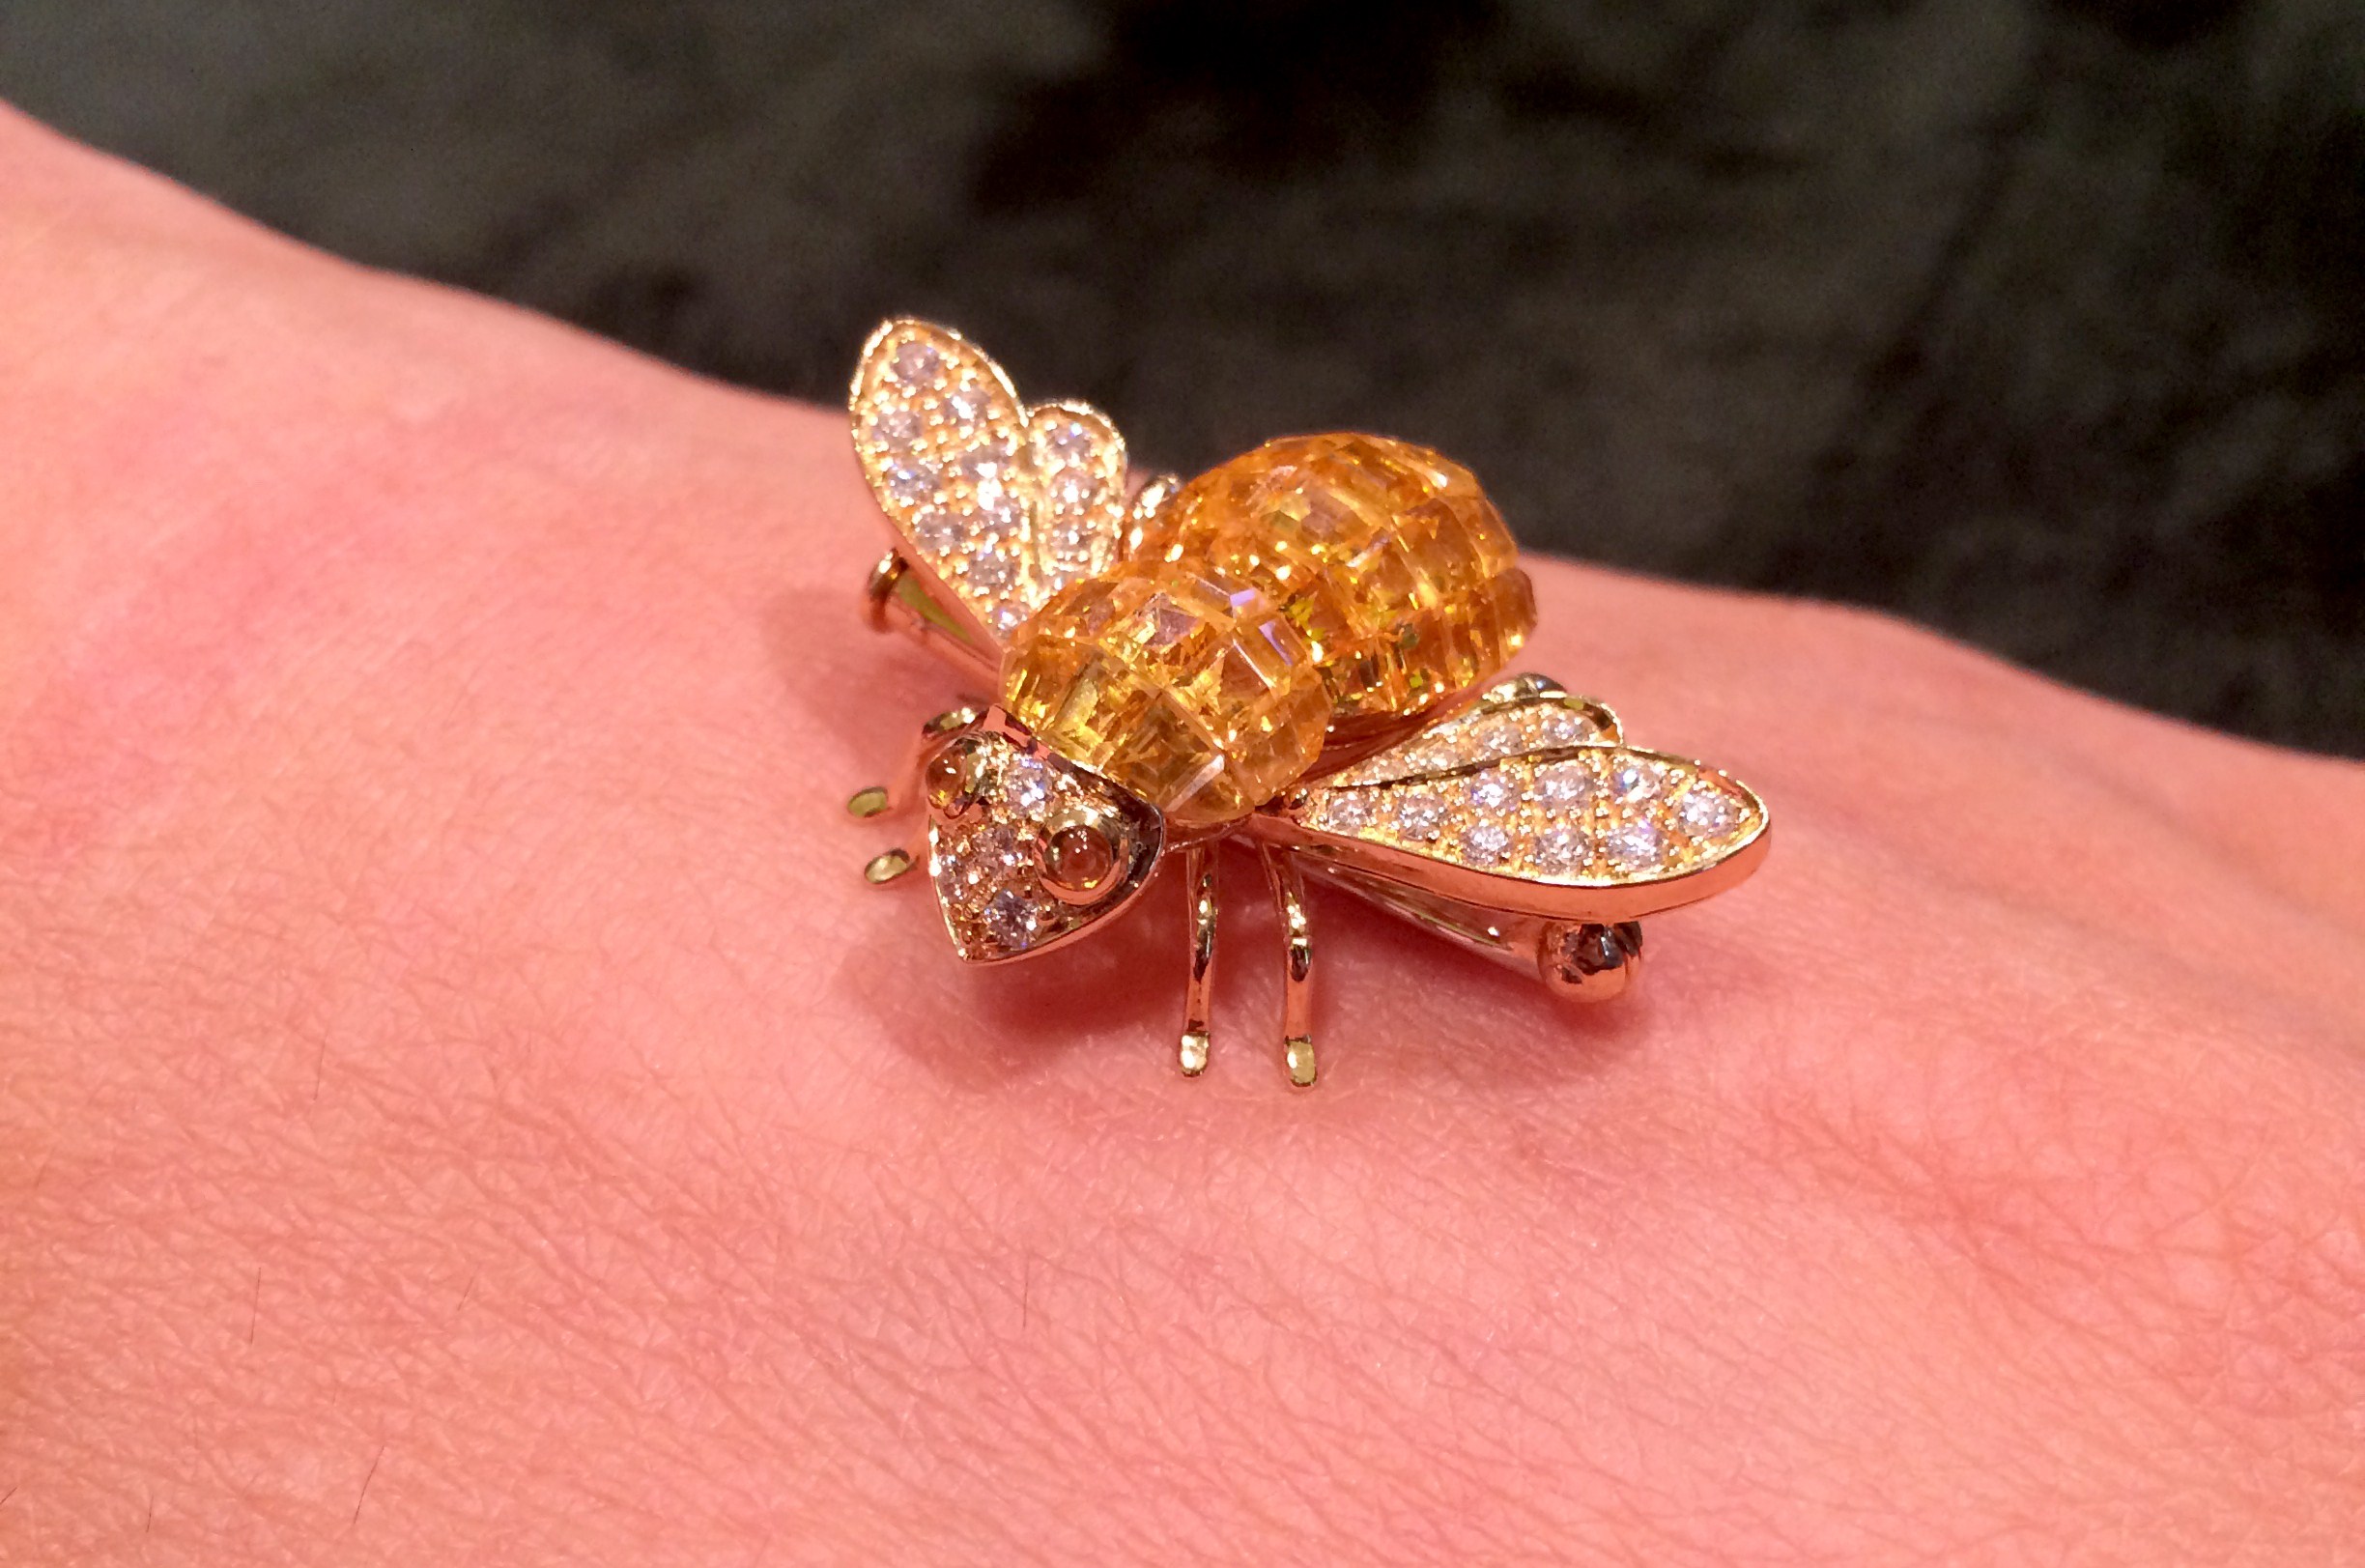 Bee brooch set in yellow gold with calibrated sapphires and diamonds